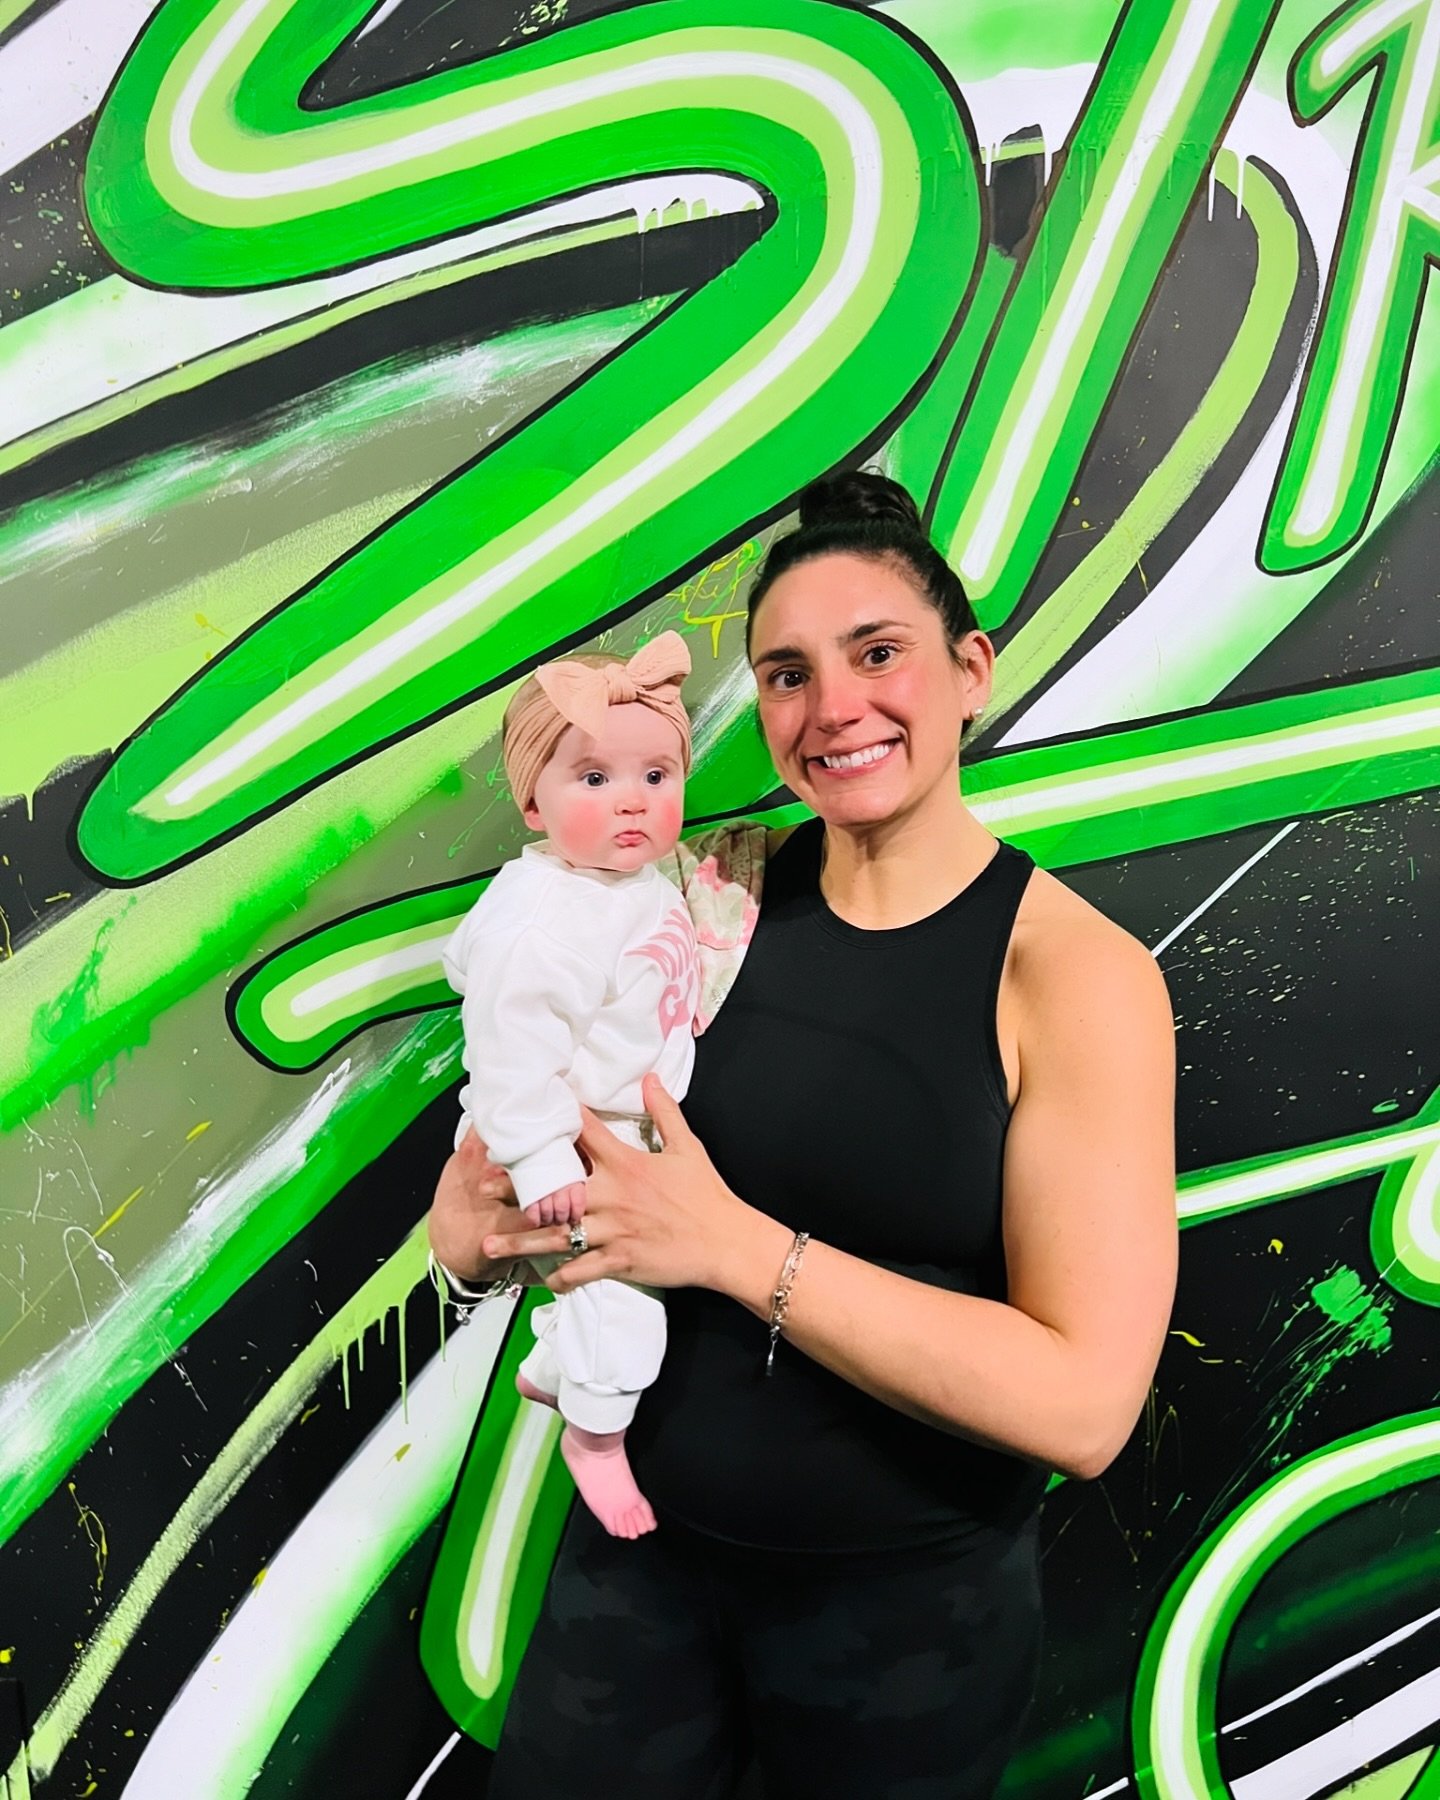 To the moms who juggle it all&mdash;work, family, and fierce workouts at PG! You inspire us with your strength and dedication. Happy Mother&rsquo;s Day! We hope you get some well-deserved relaxation today 💚